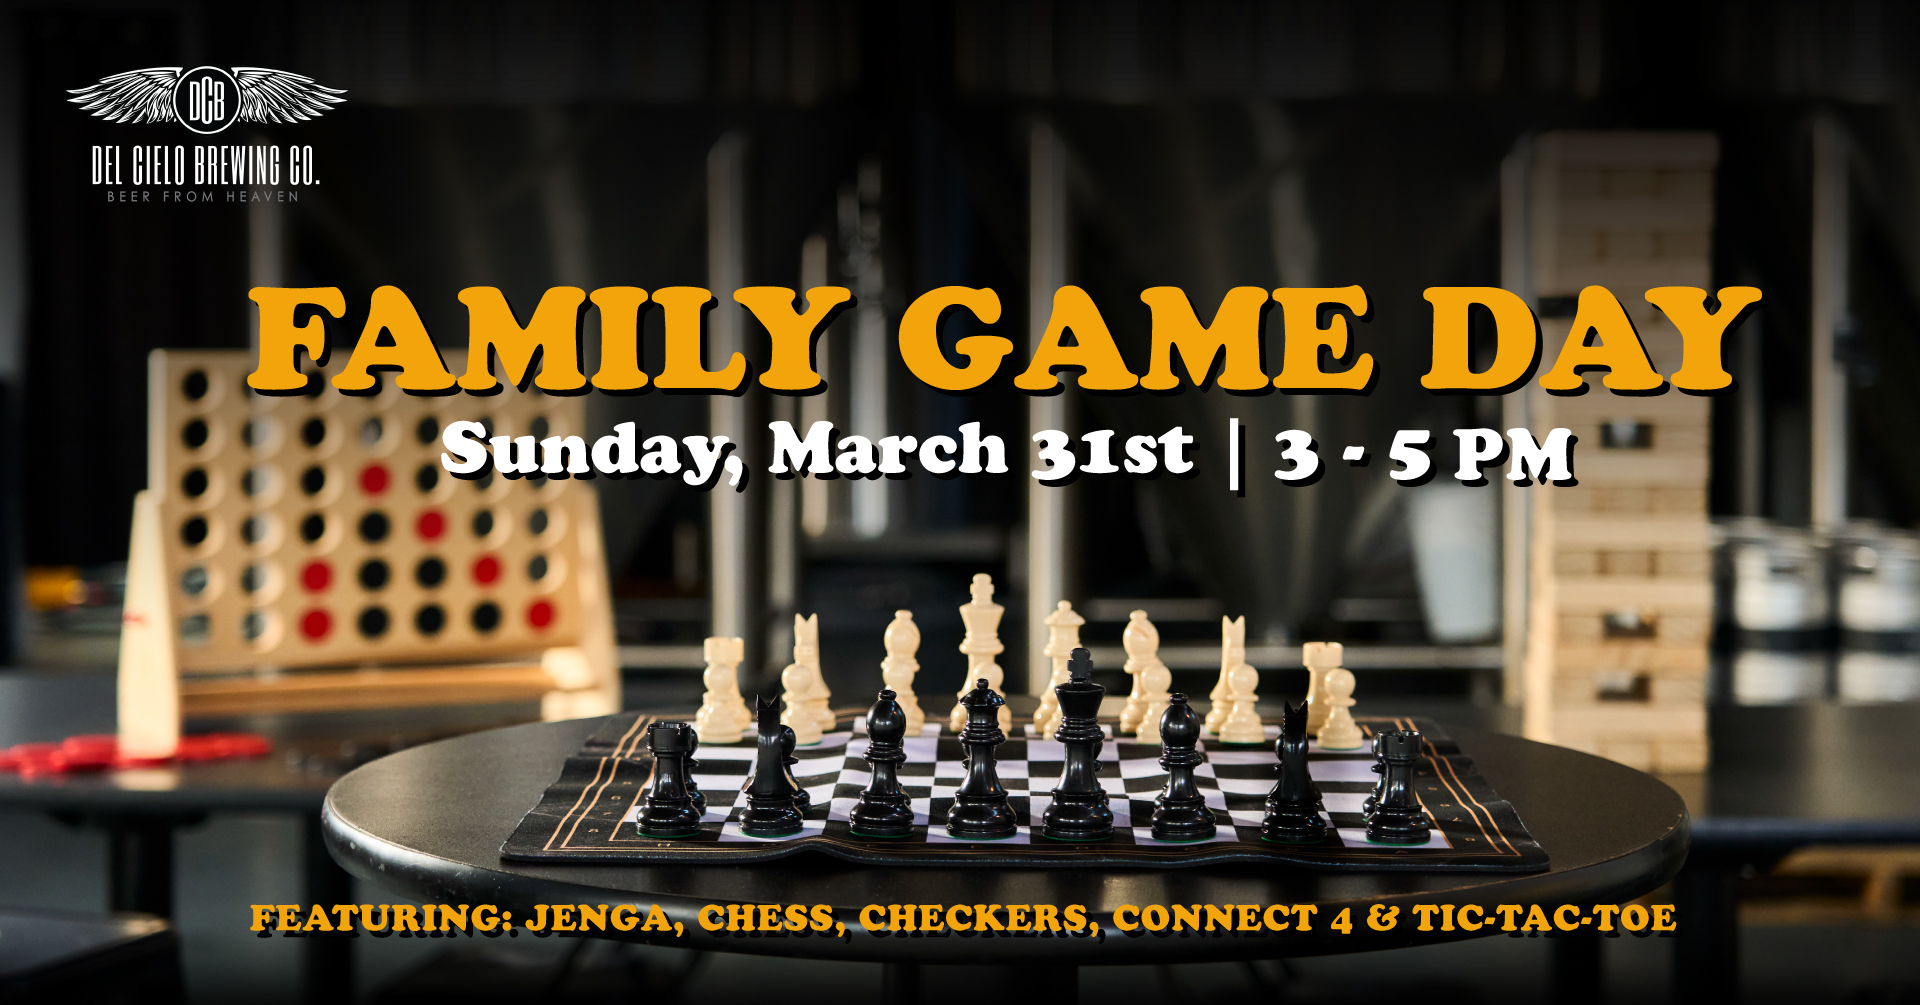 family game day free to play march 31st 3-5pm